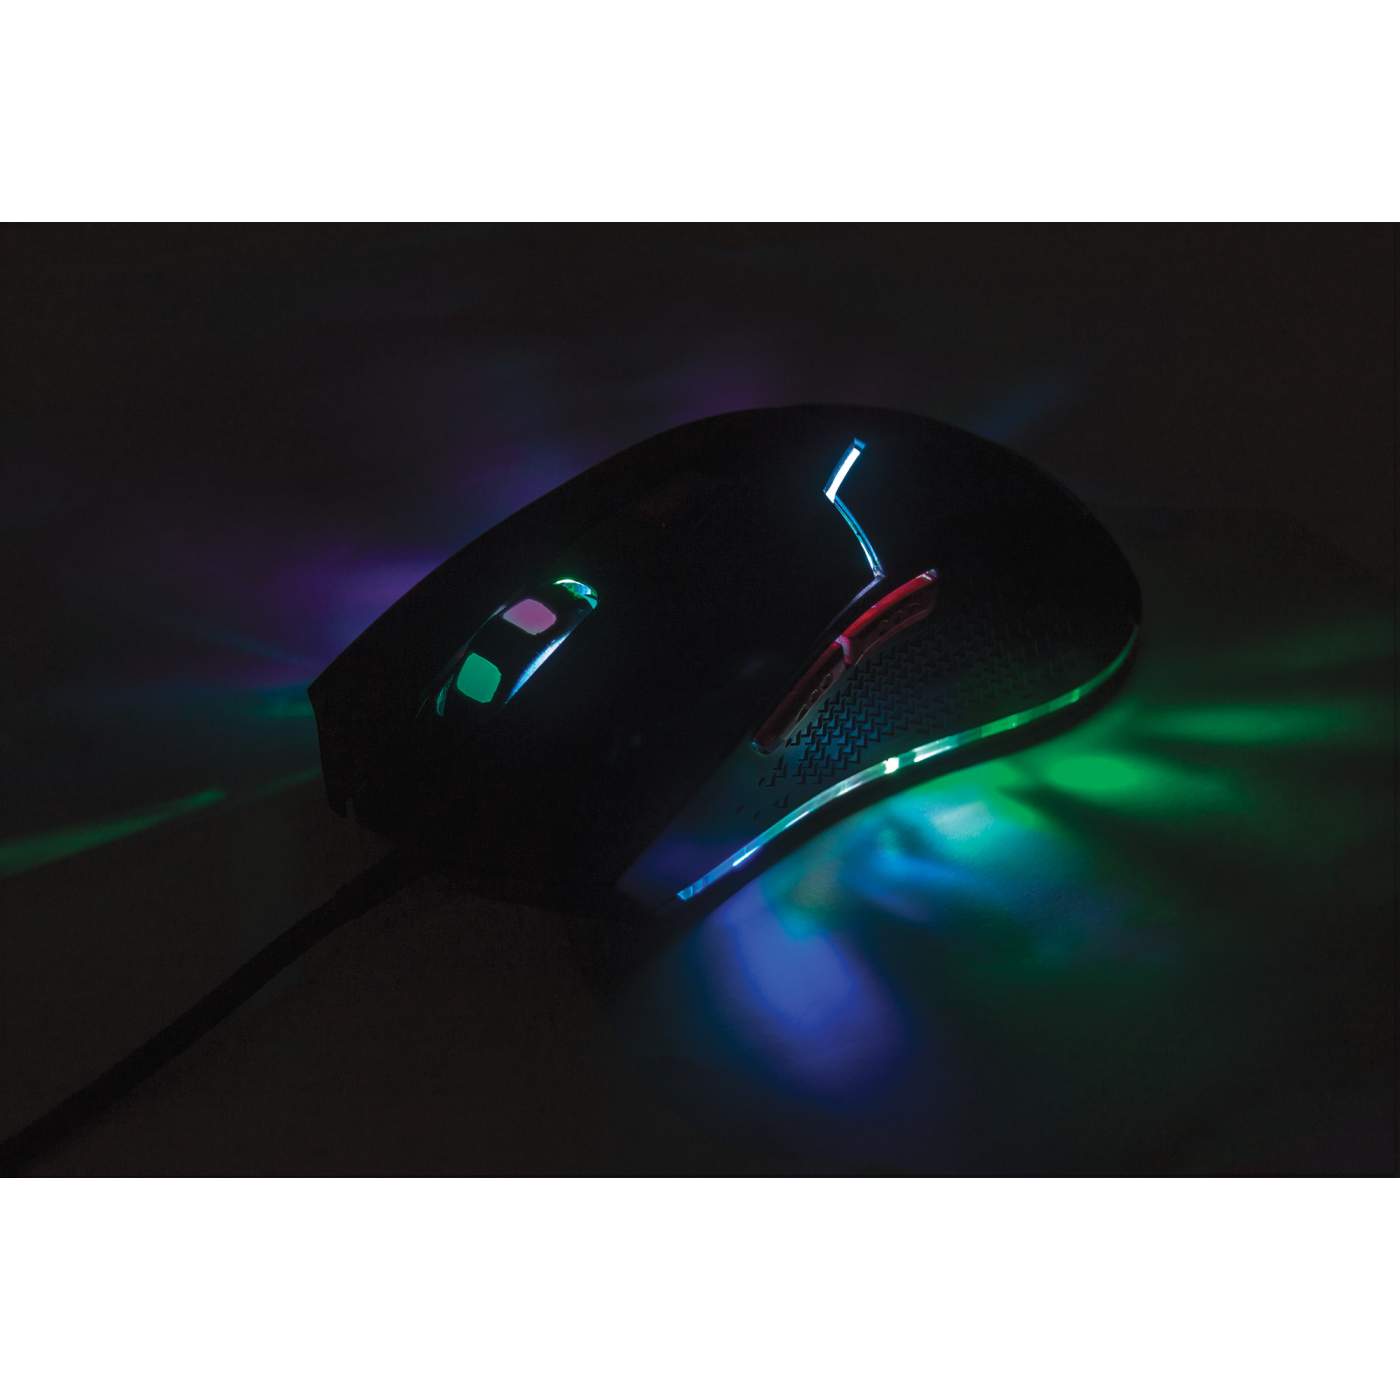 Xiaomi launches Gaming Mouse Lite with RGB lighting for just $ 15